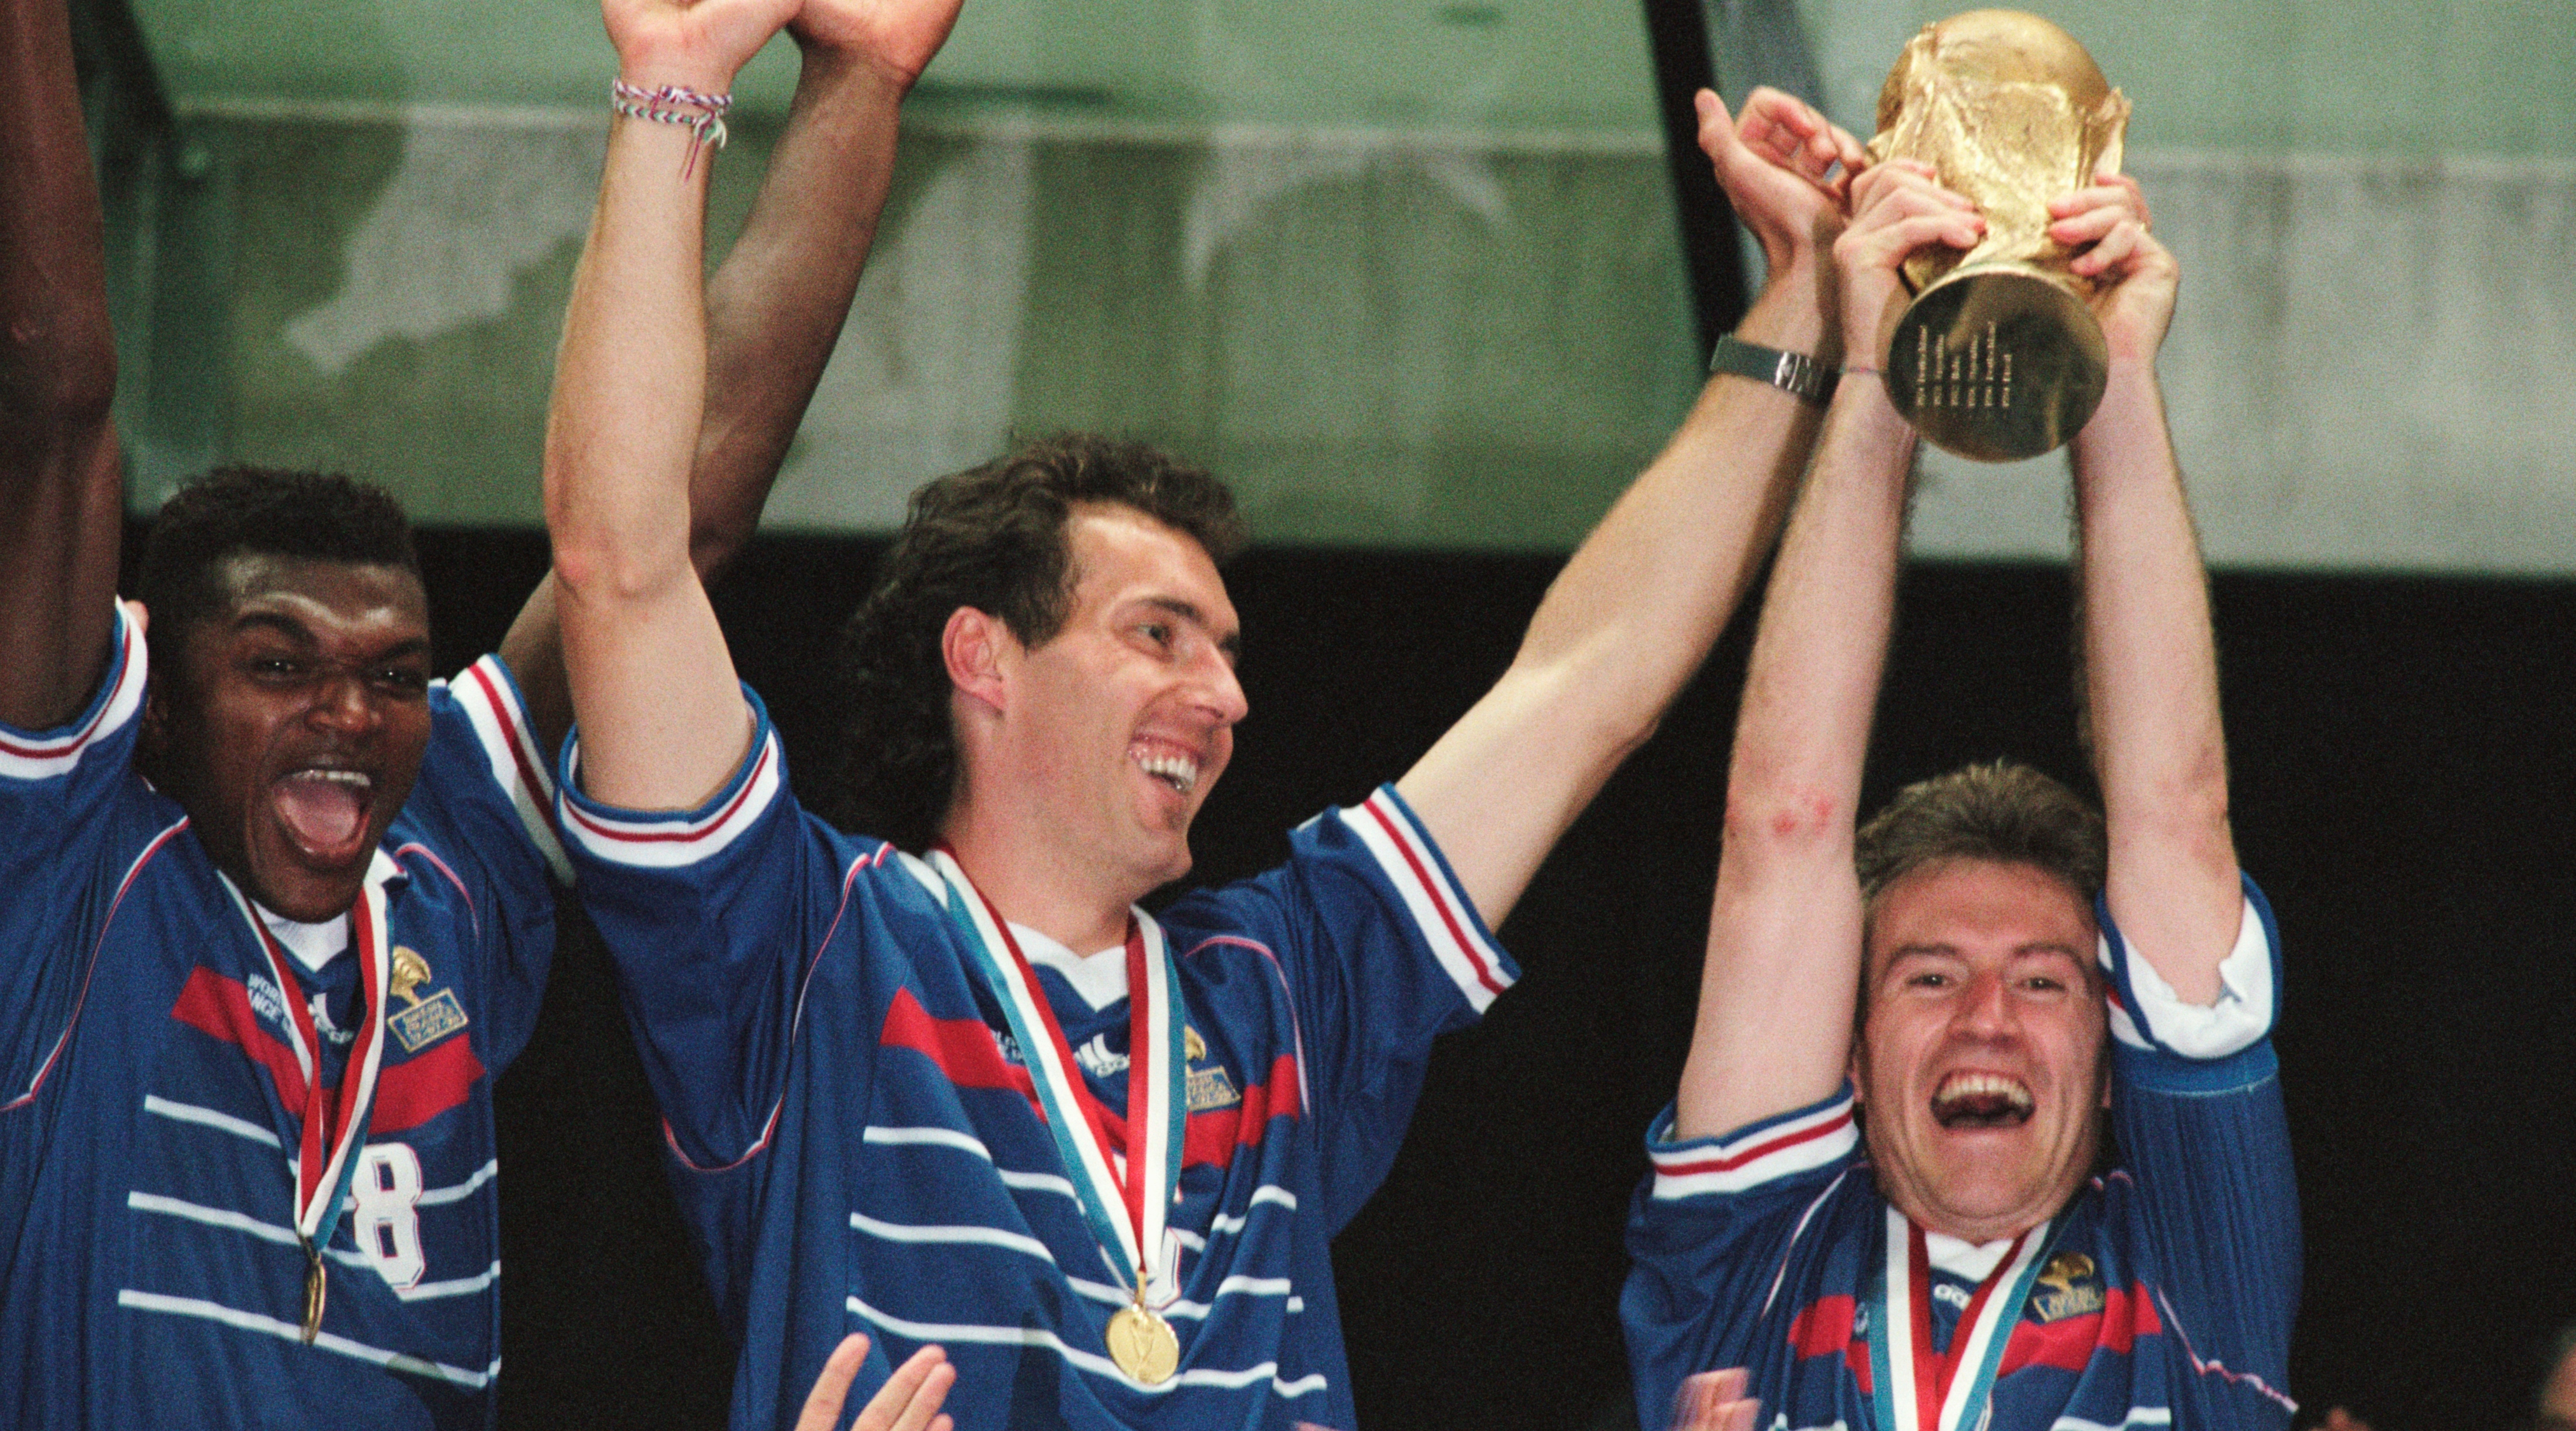 France's players (L-R) Marcel Desailly, Laurent Blanc and captain Didier Deschamps, holding the trophy, celebrate after their 3-0 victory over Brazil in the final of the 1998 FIFA World Cup. | Location: Saint-Denis, France.